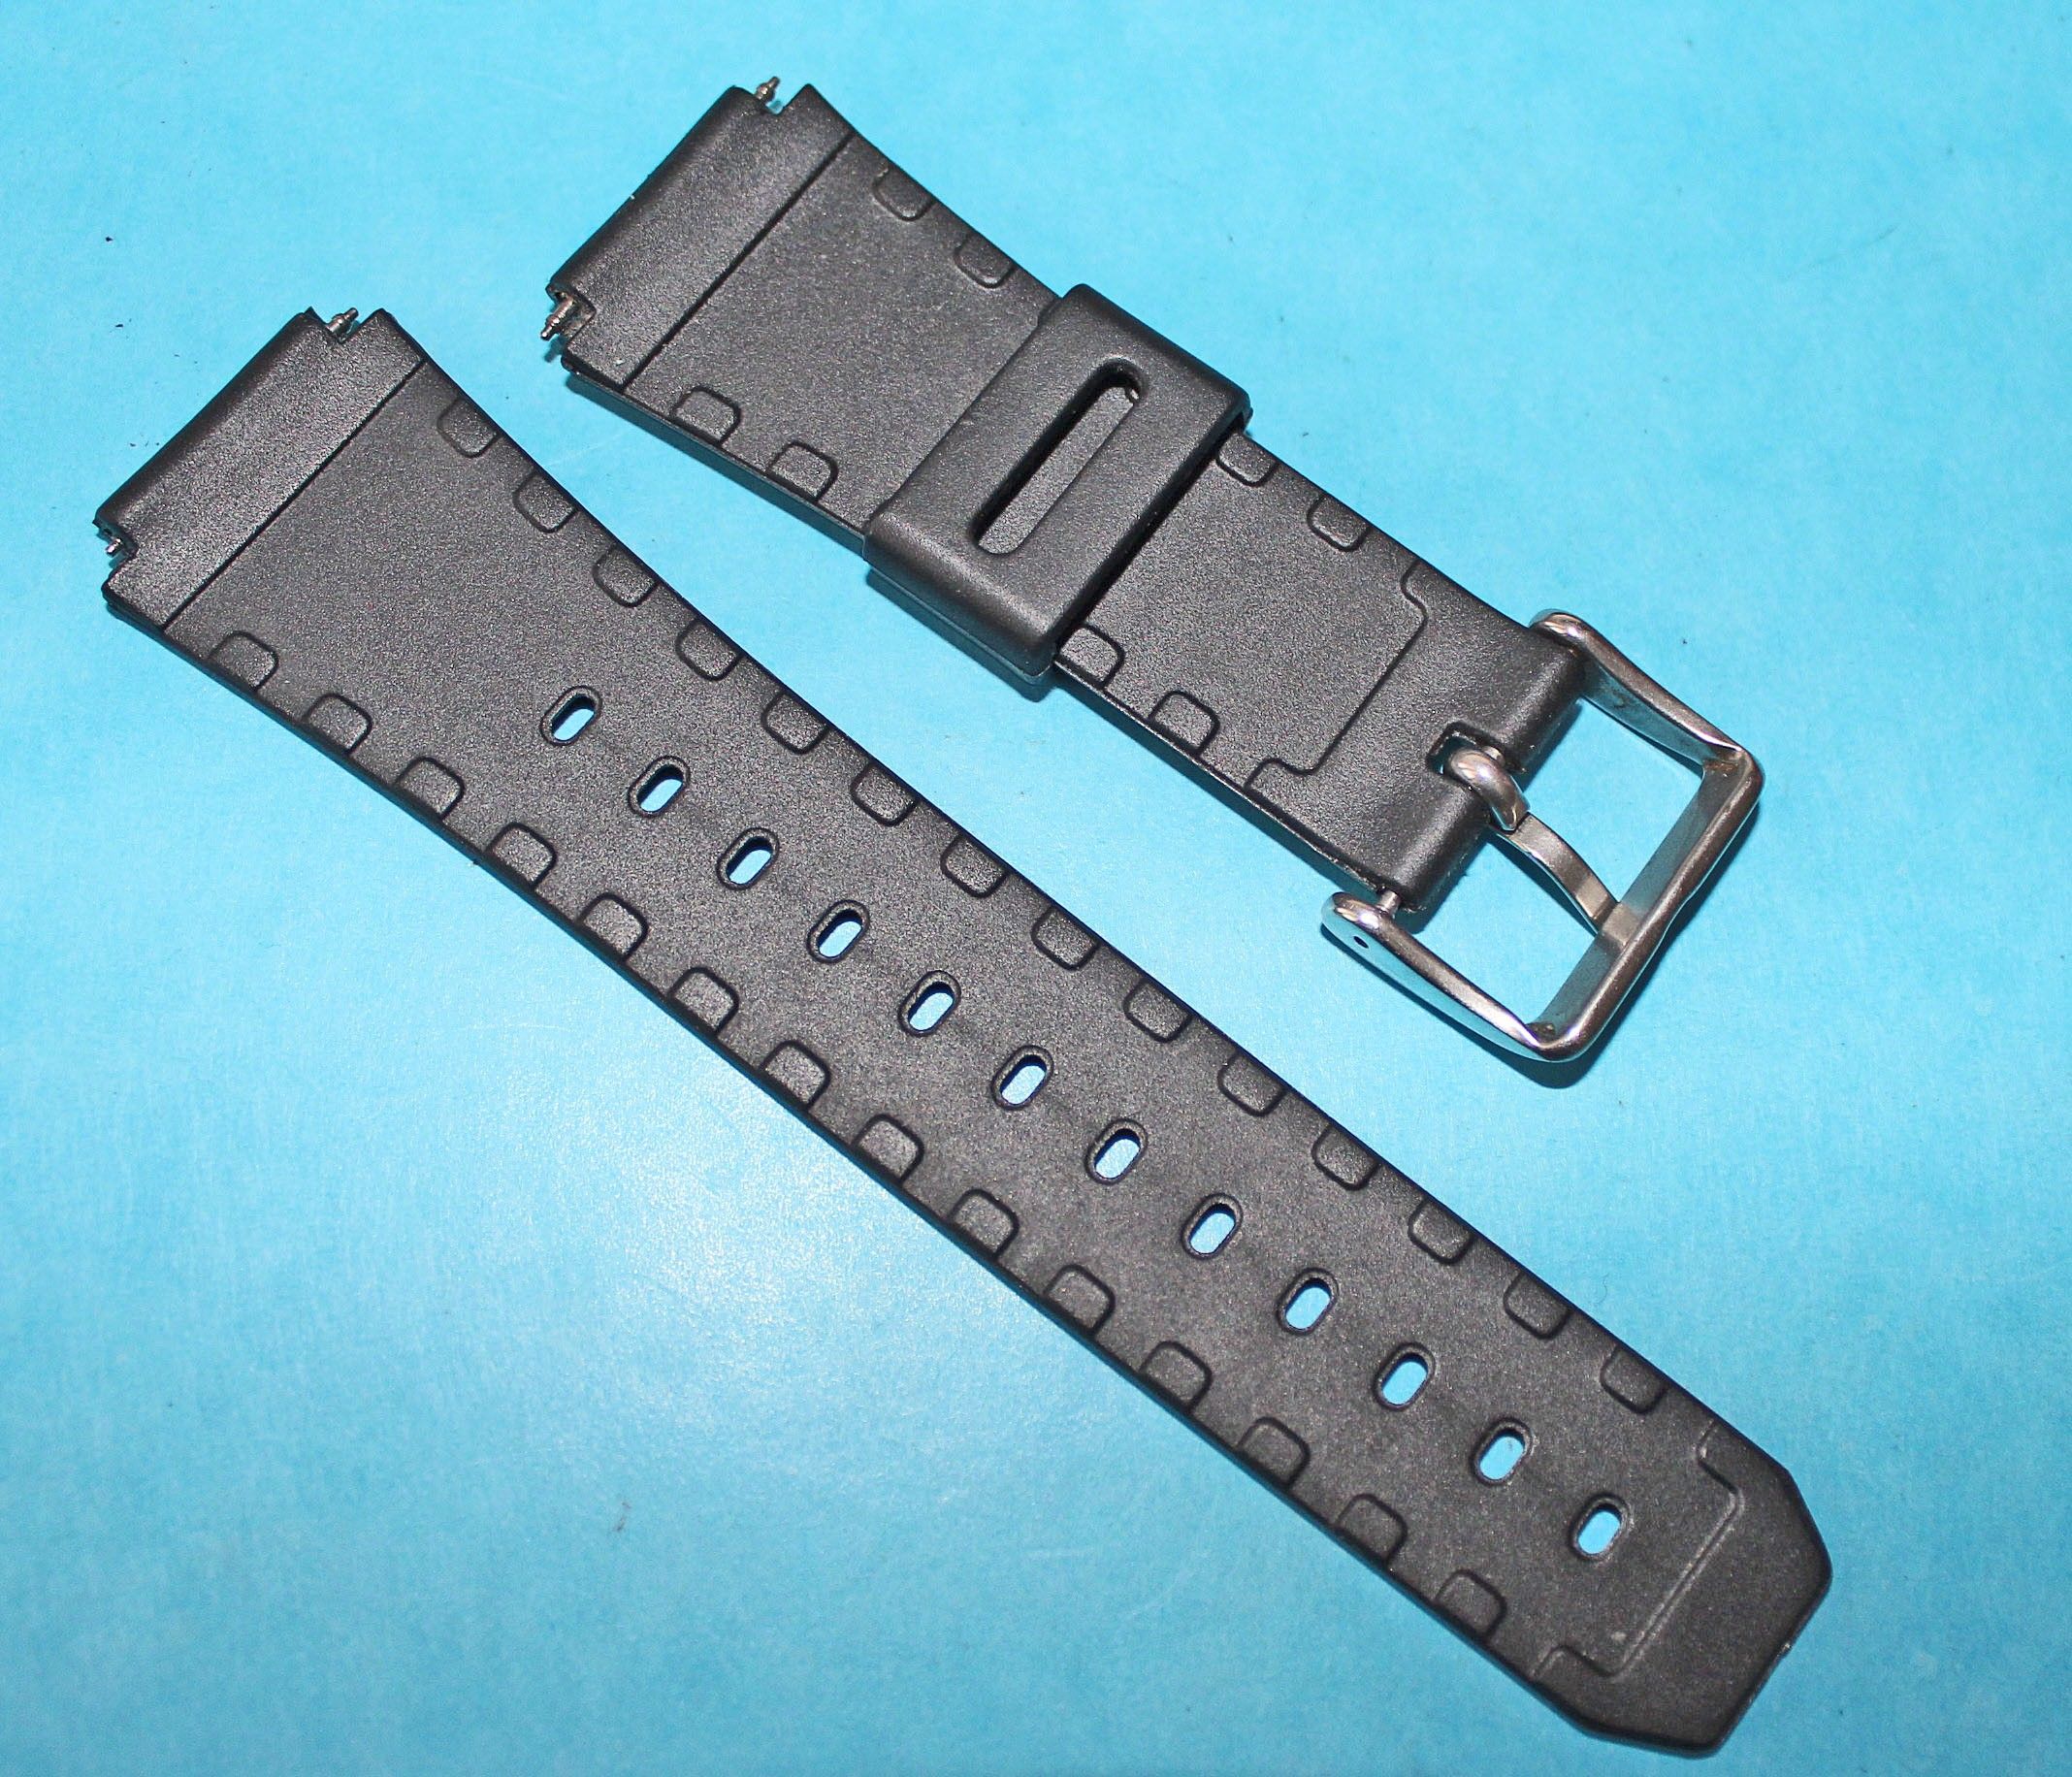 Casio Rubber Band 18 MM Sport Watch Band Fits Vintages 80's Watches Casio Databank